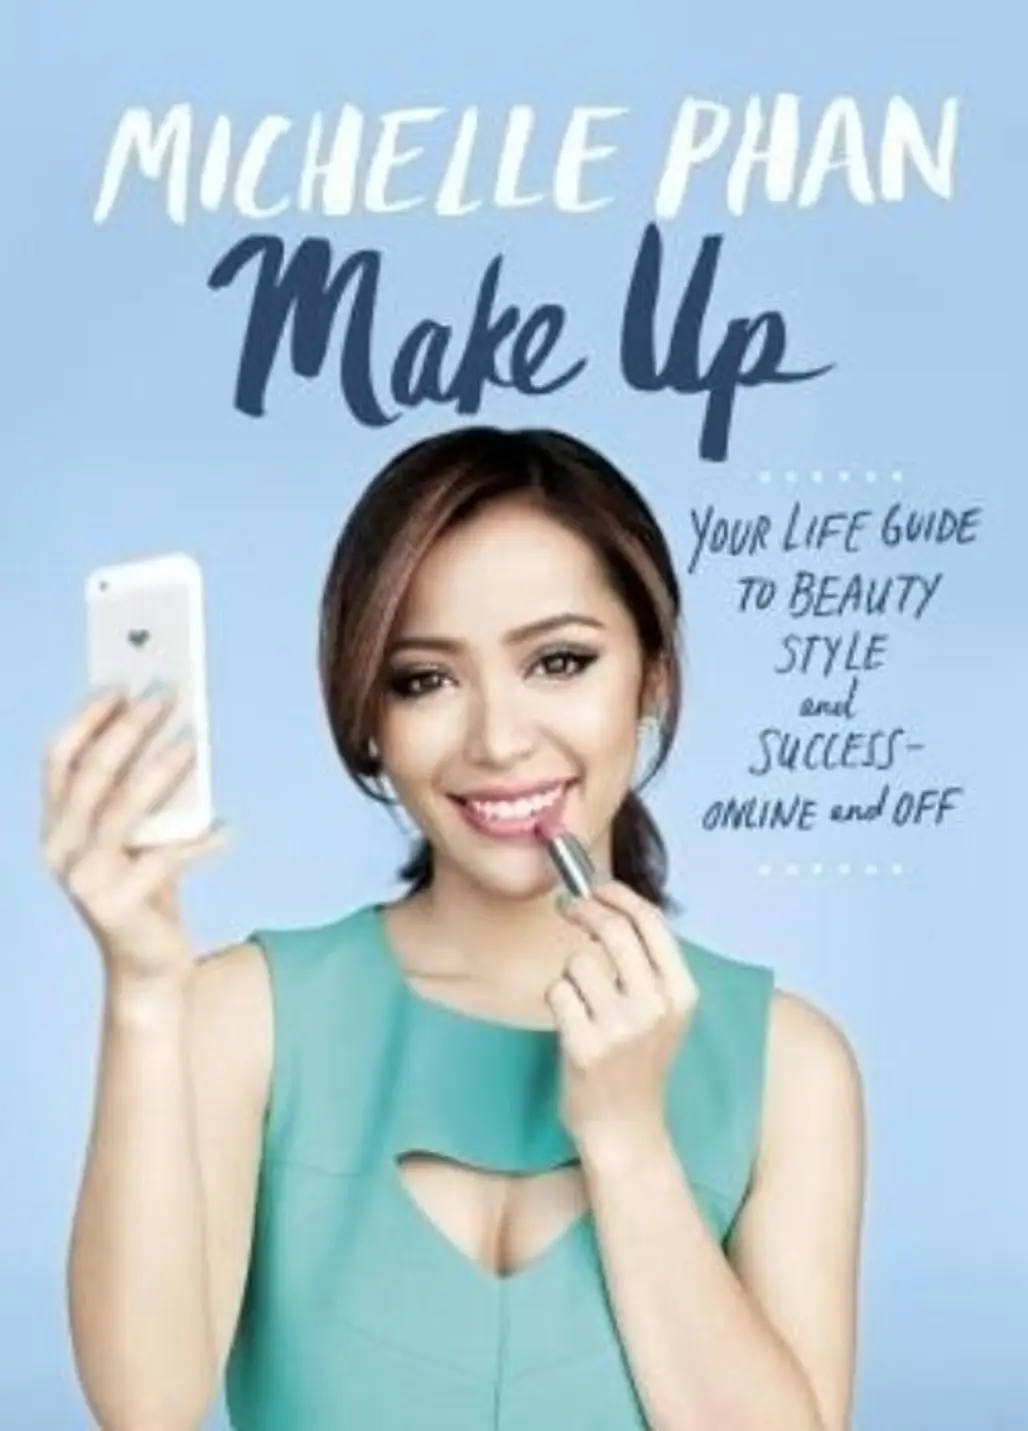 Make up: Your Life Guide